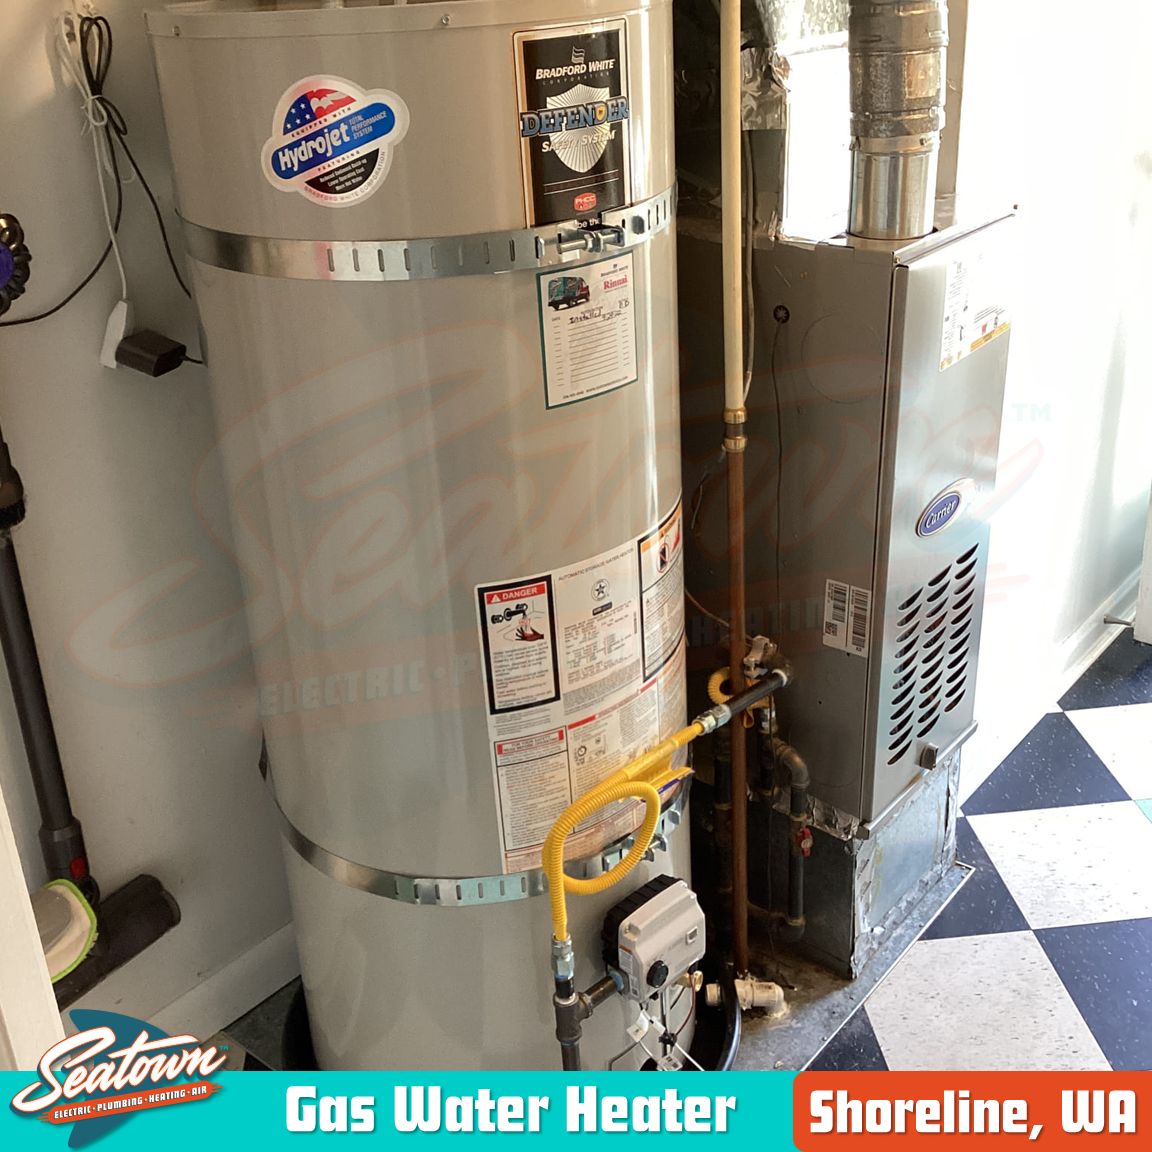 Maintaining A Water Heater: Repair And Service Guide – Forbes Home